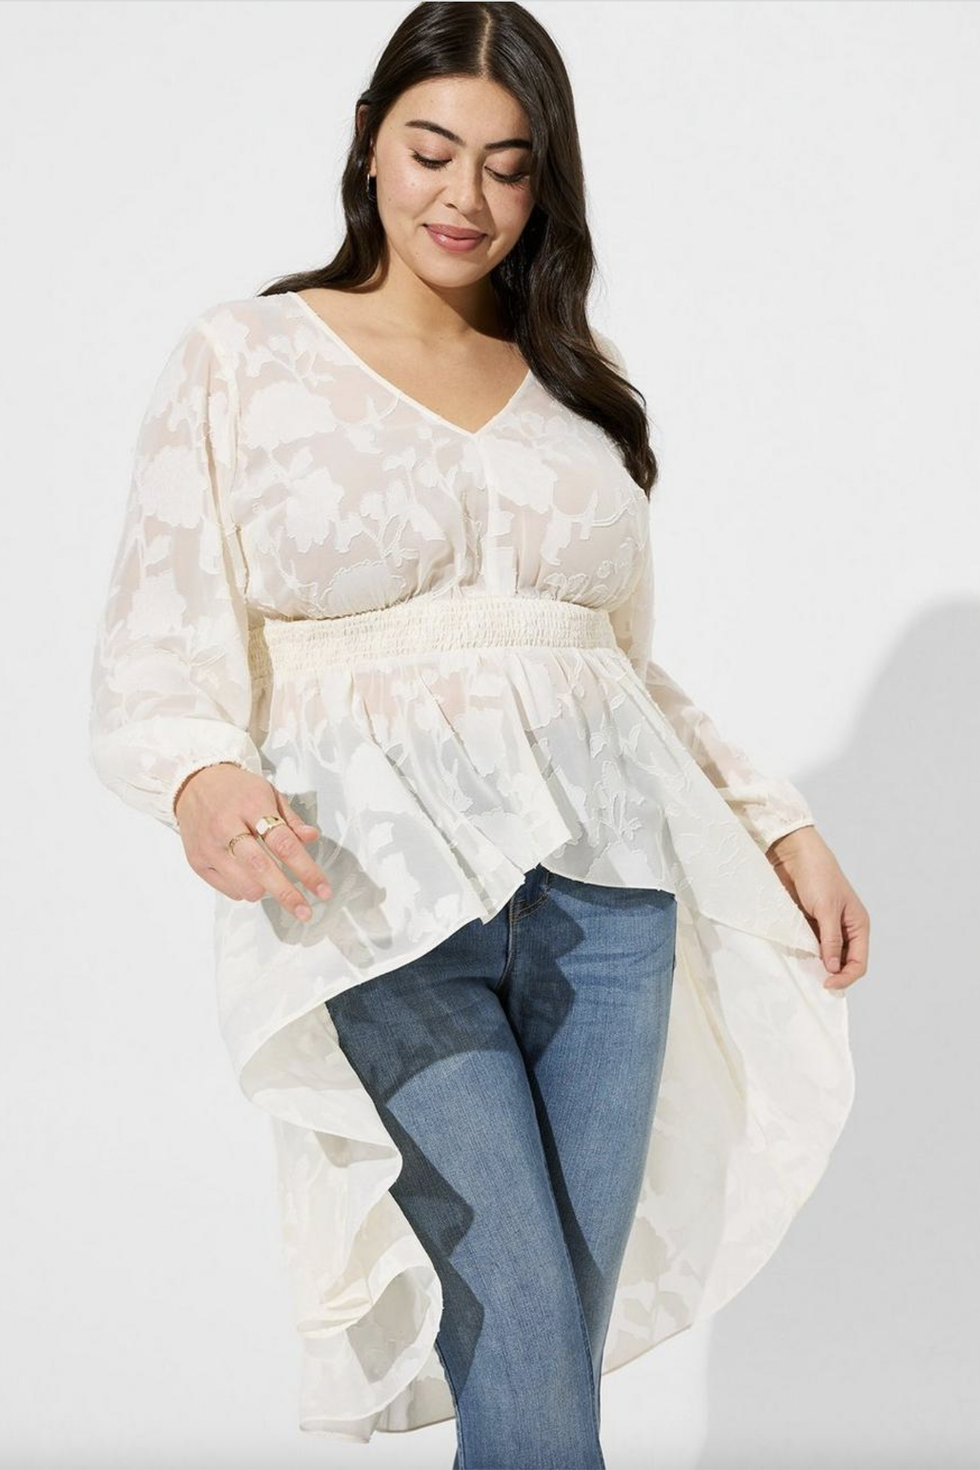 Ivory Floral Chiffon Dress, LOVE IS A ROSE  Chiffon dress, Torrid dresses,  Torrid fashion